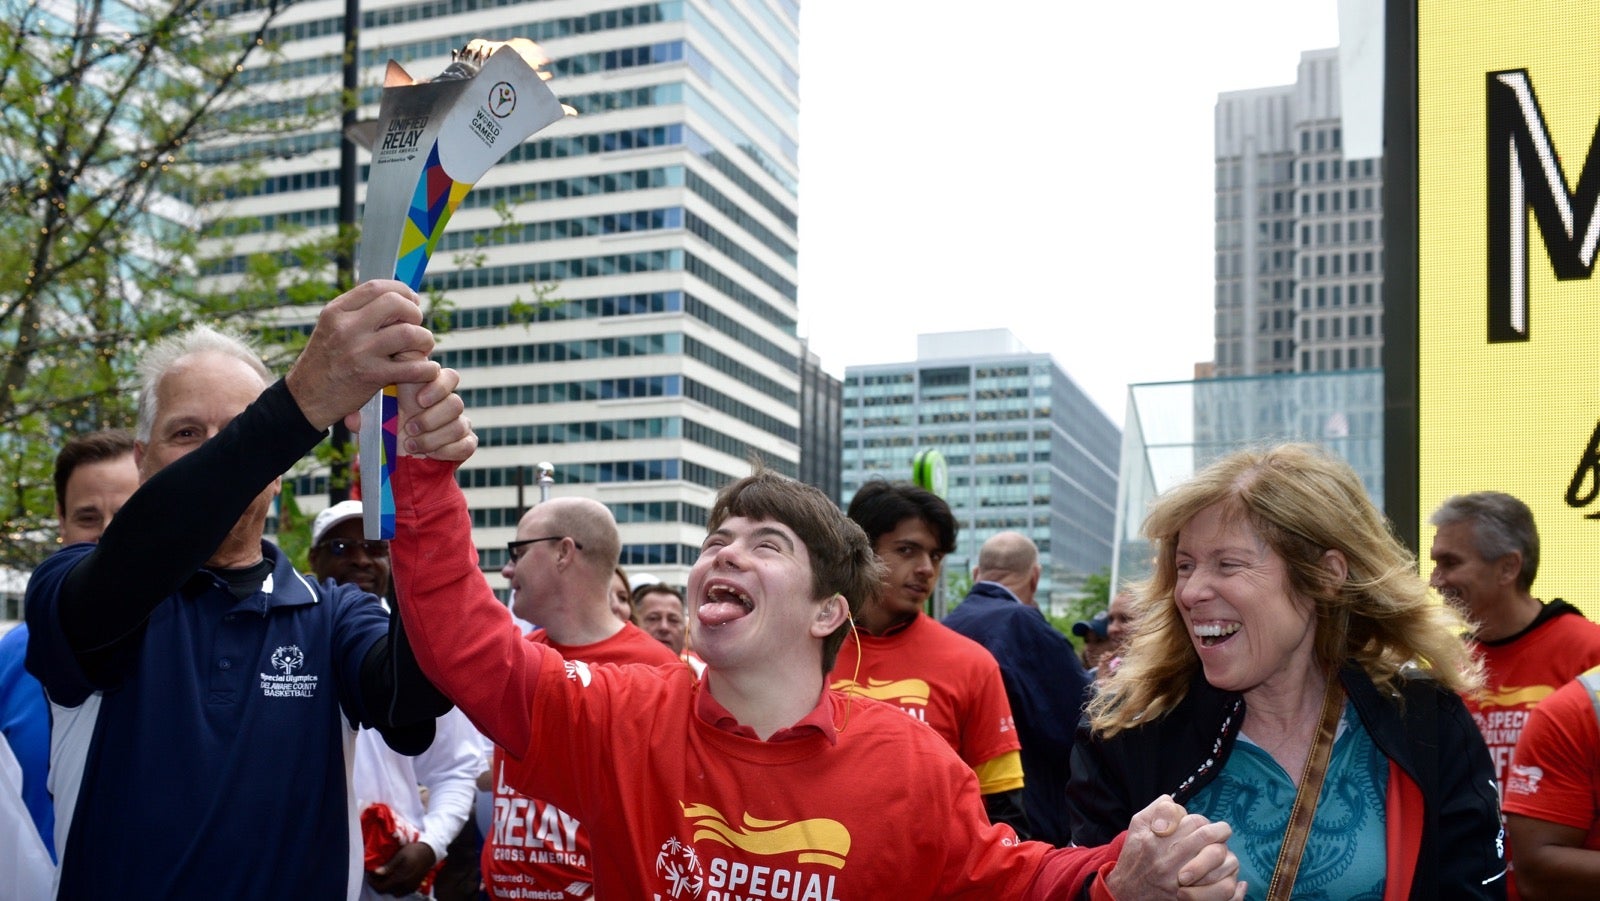 On Friday the Flame of Hope is carried by local athletes and supporters. (Bastiaan Slabbers/for NewsWorks)